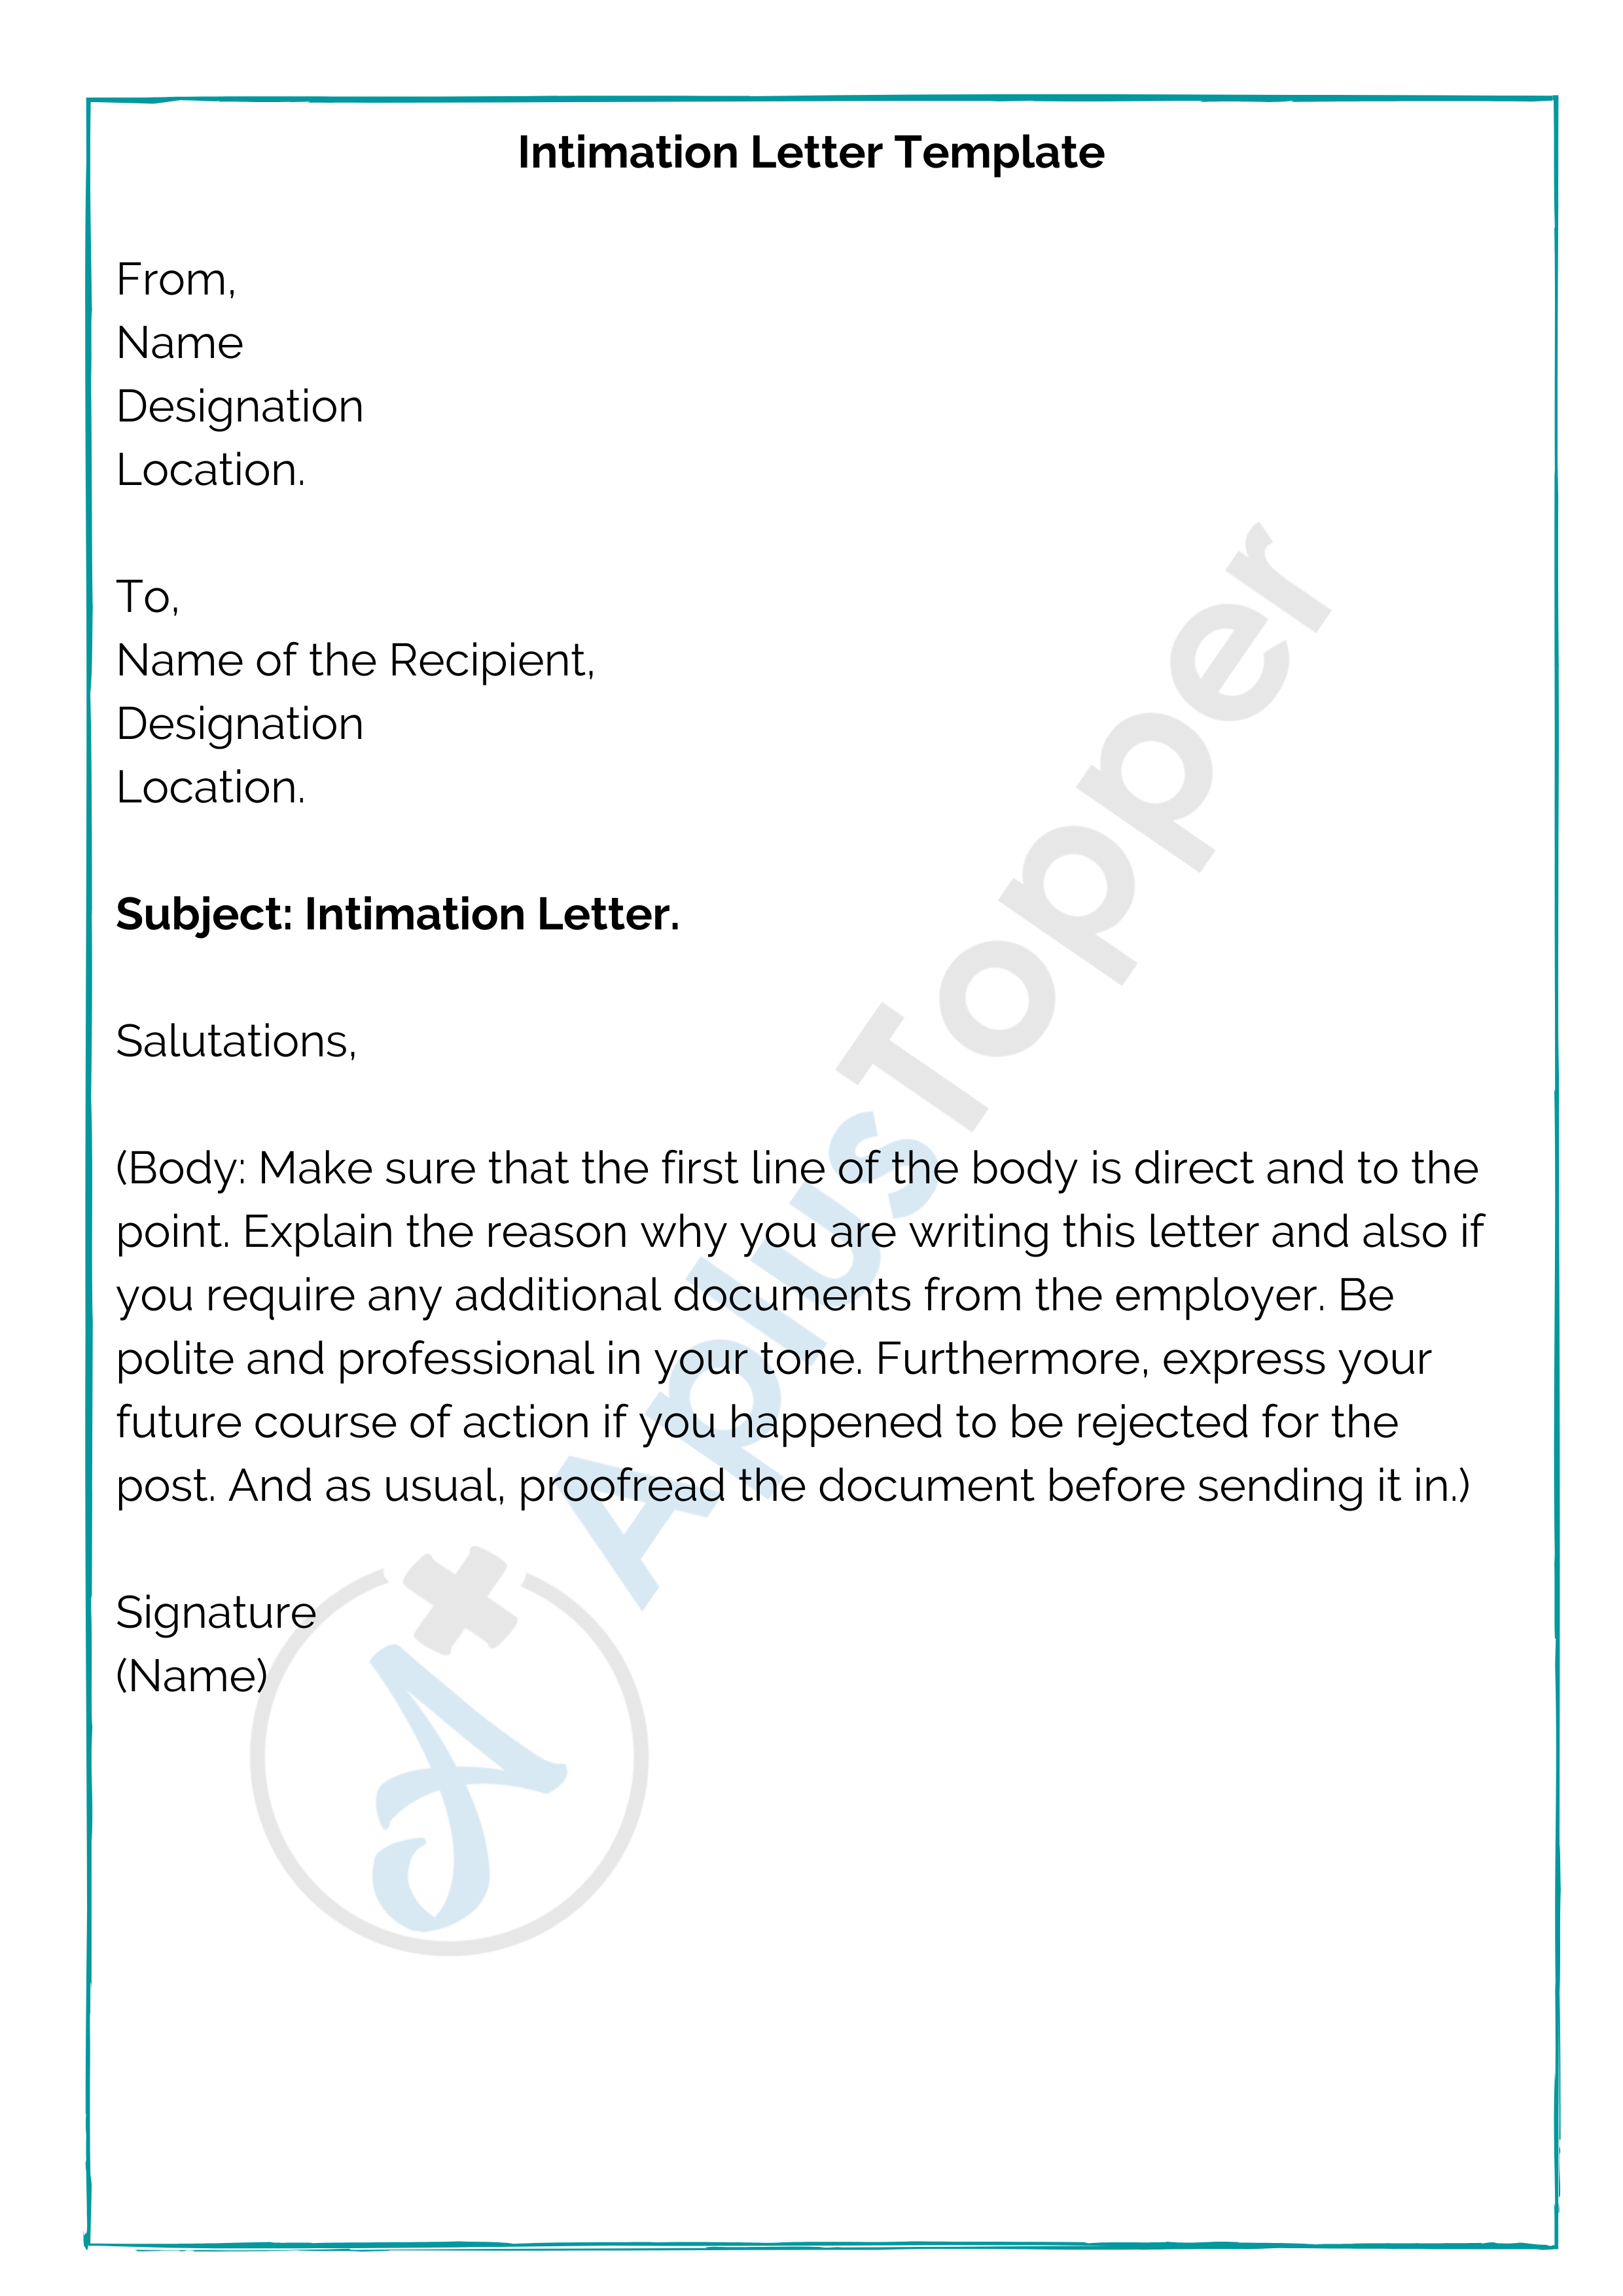 Intimation Letter  Format, Samples, How To Write an Intimation